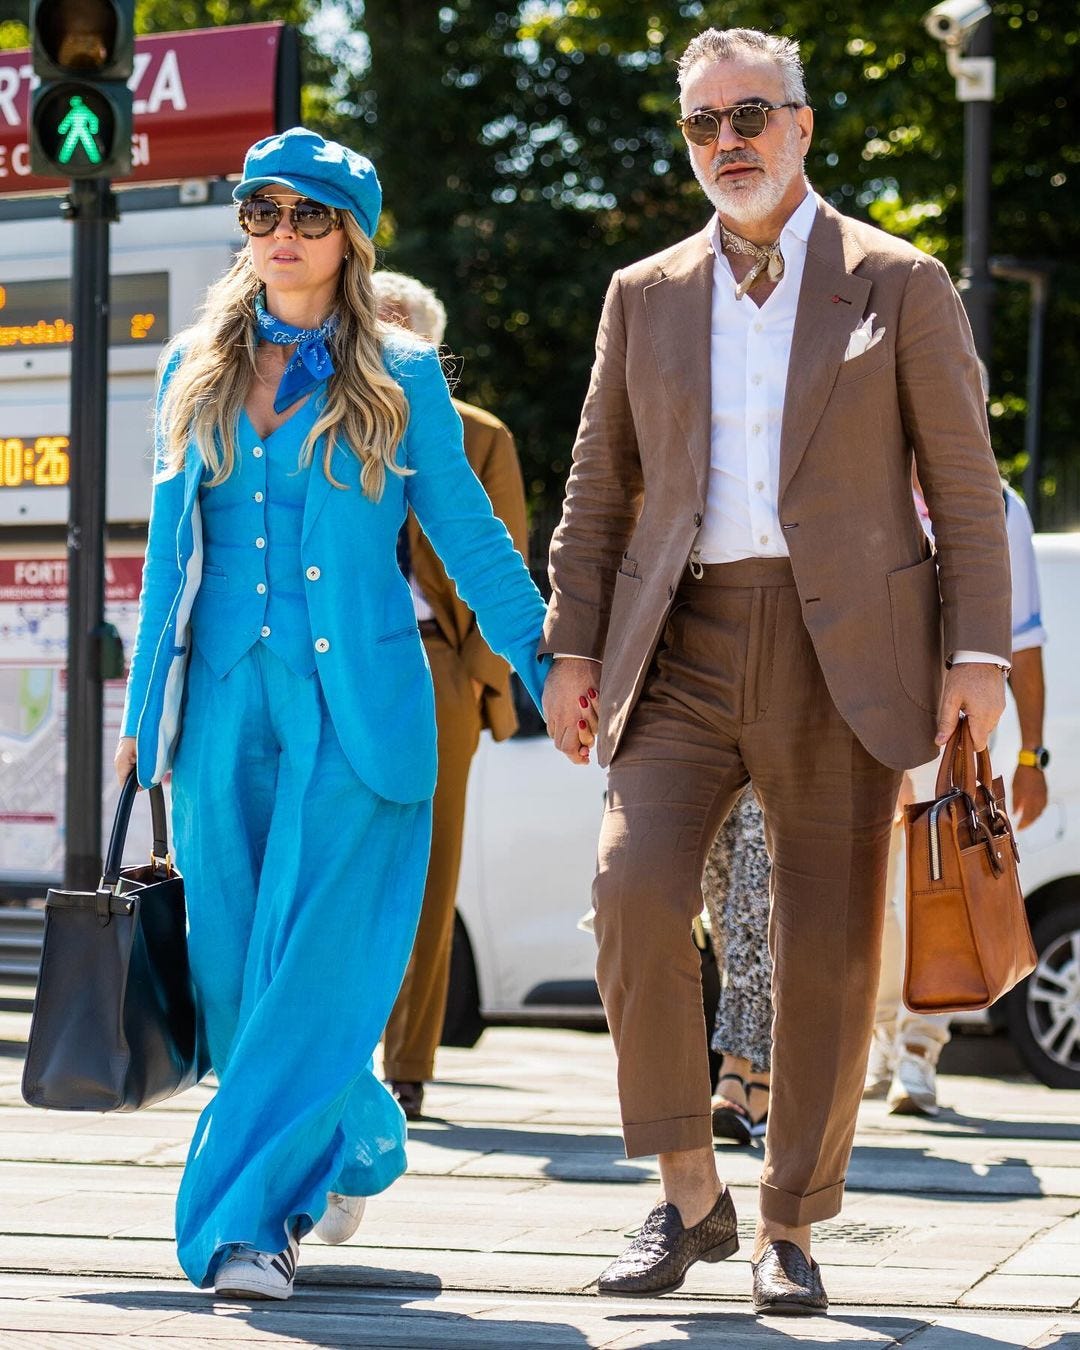 chic man and woman holding hands, both in casual suiting